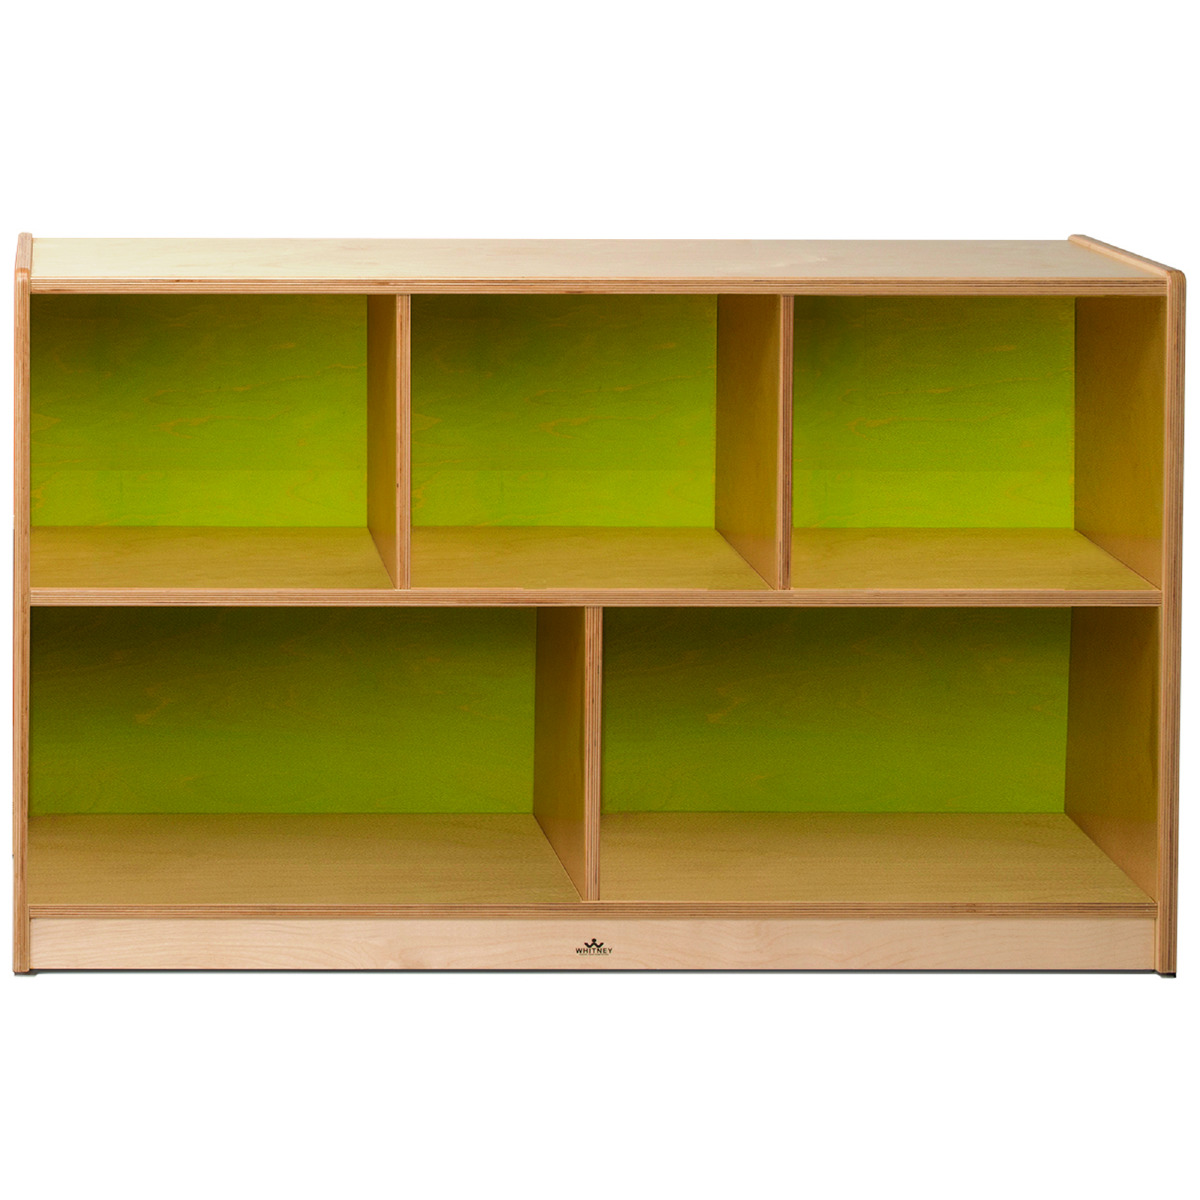 Ch1330g 18 Mm 30 In. Standard Cabinet - Green & Natural Uv